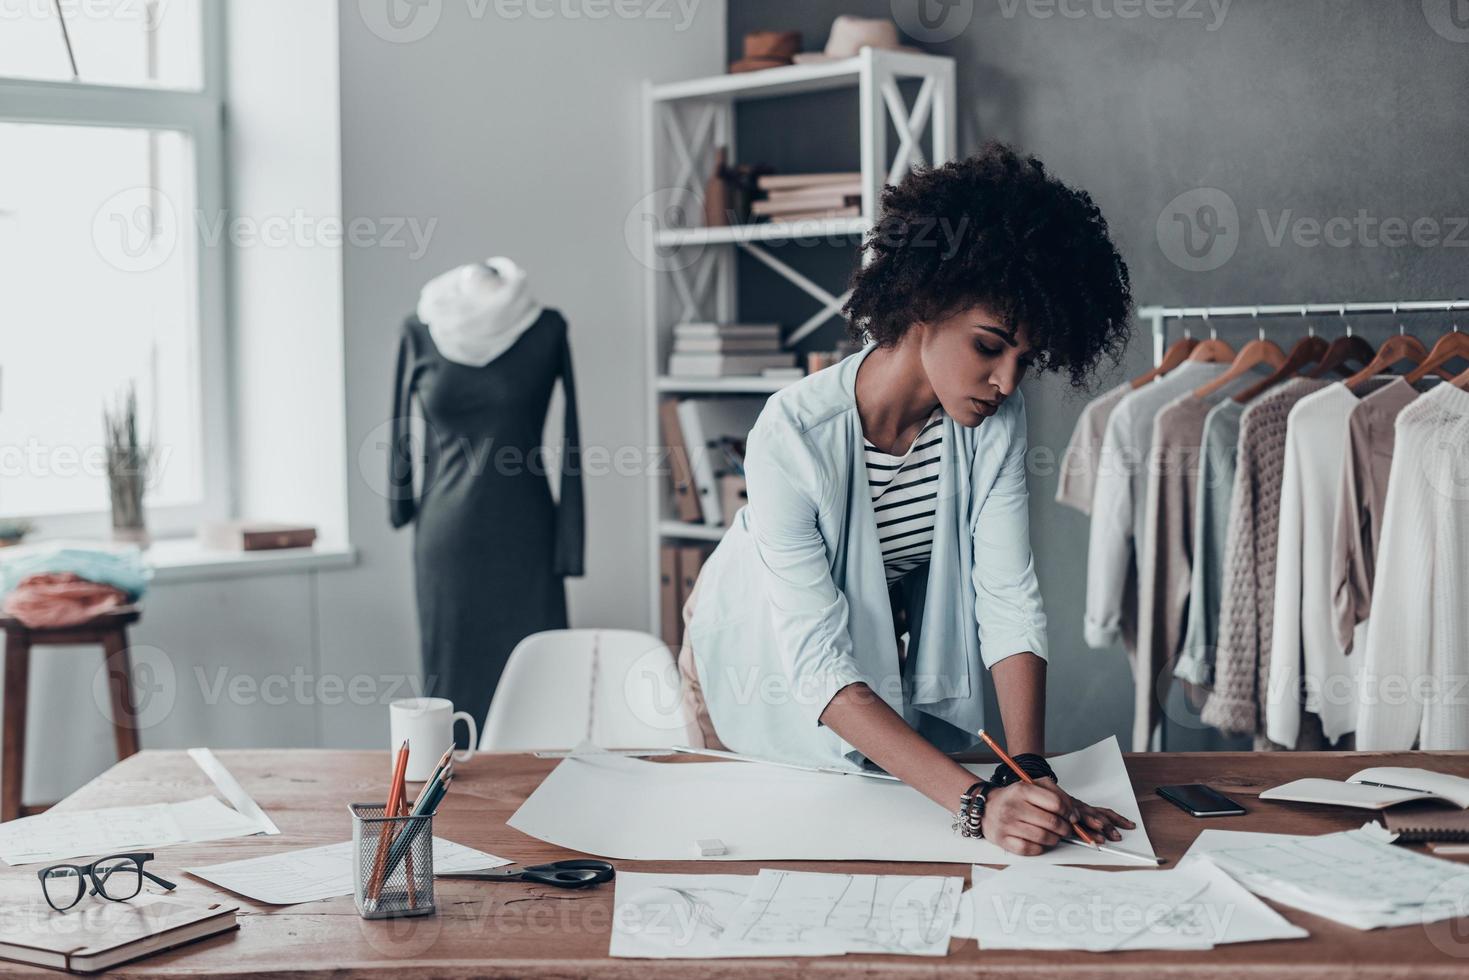 Turning ideas into clothing. Beautiful young African woman working on sketches while standing in her studio near the clothes hanging on the racks photo